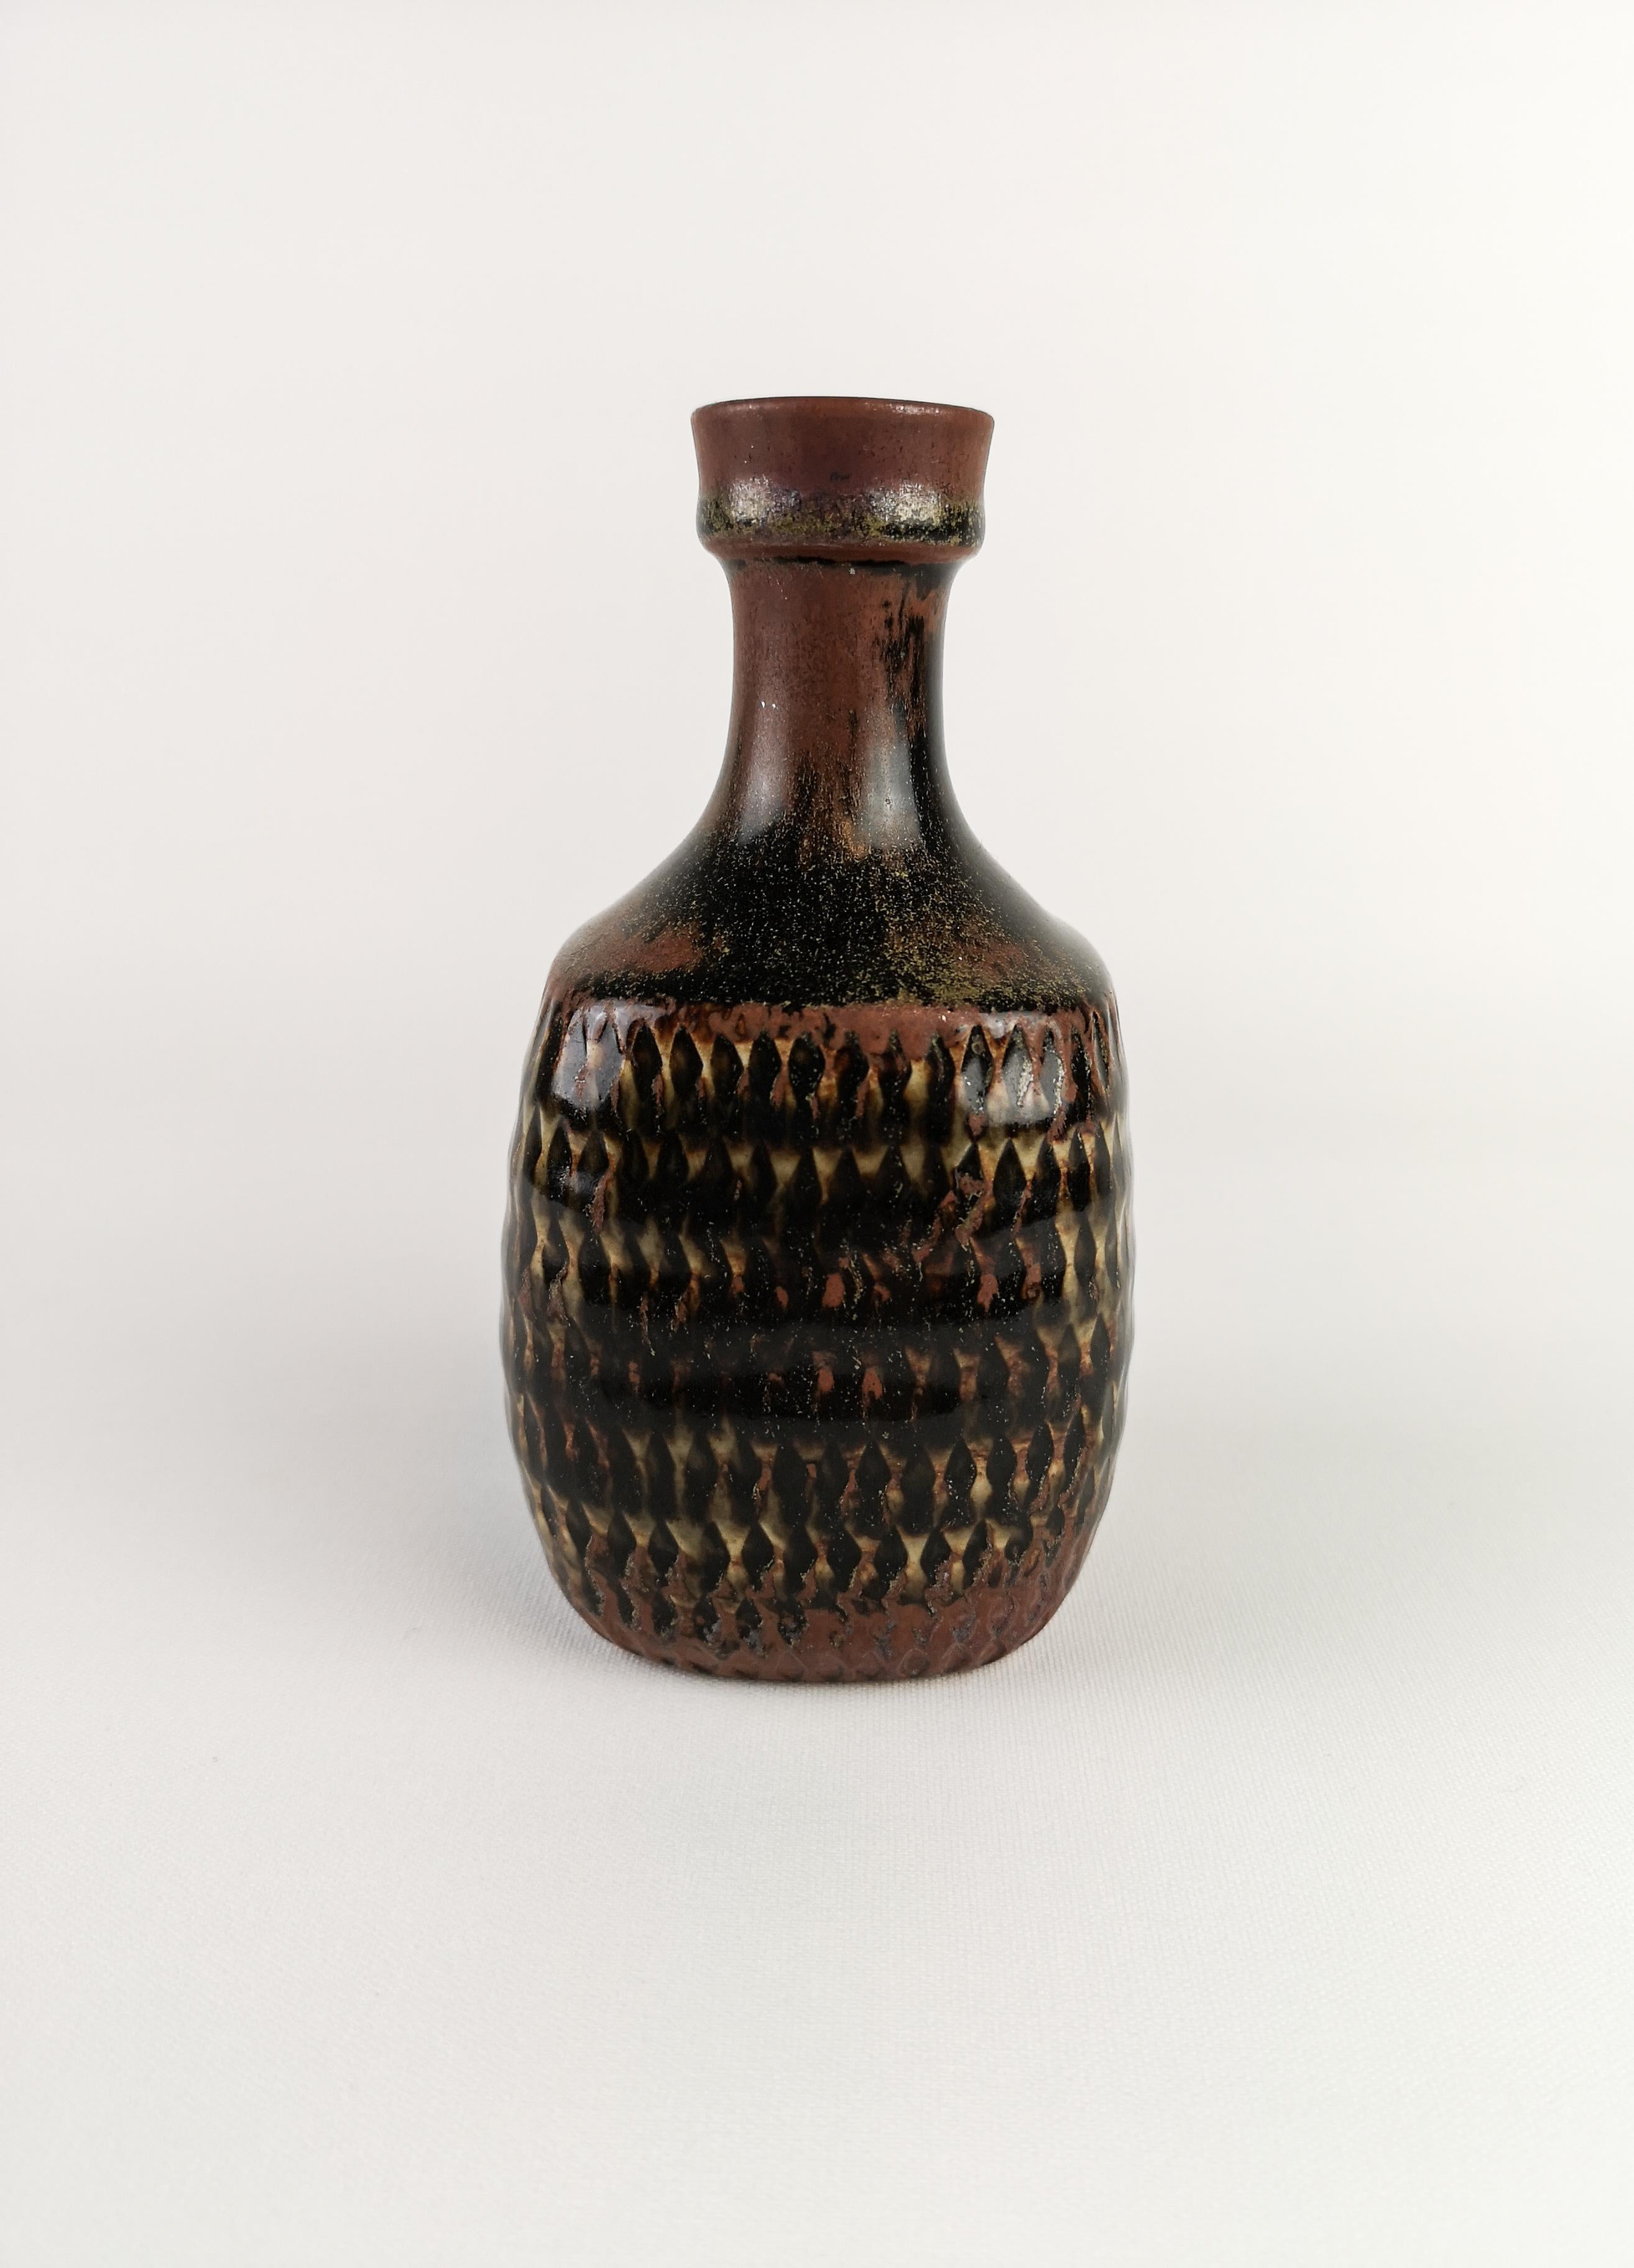 An unique Stig Lindberg Gustavberg studio pottery vase.

The glaze in brown, black and a littlebit yellow. 

Marked with Studio Hand.